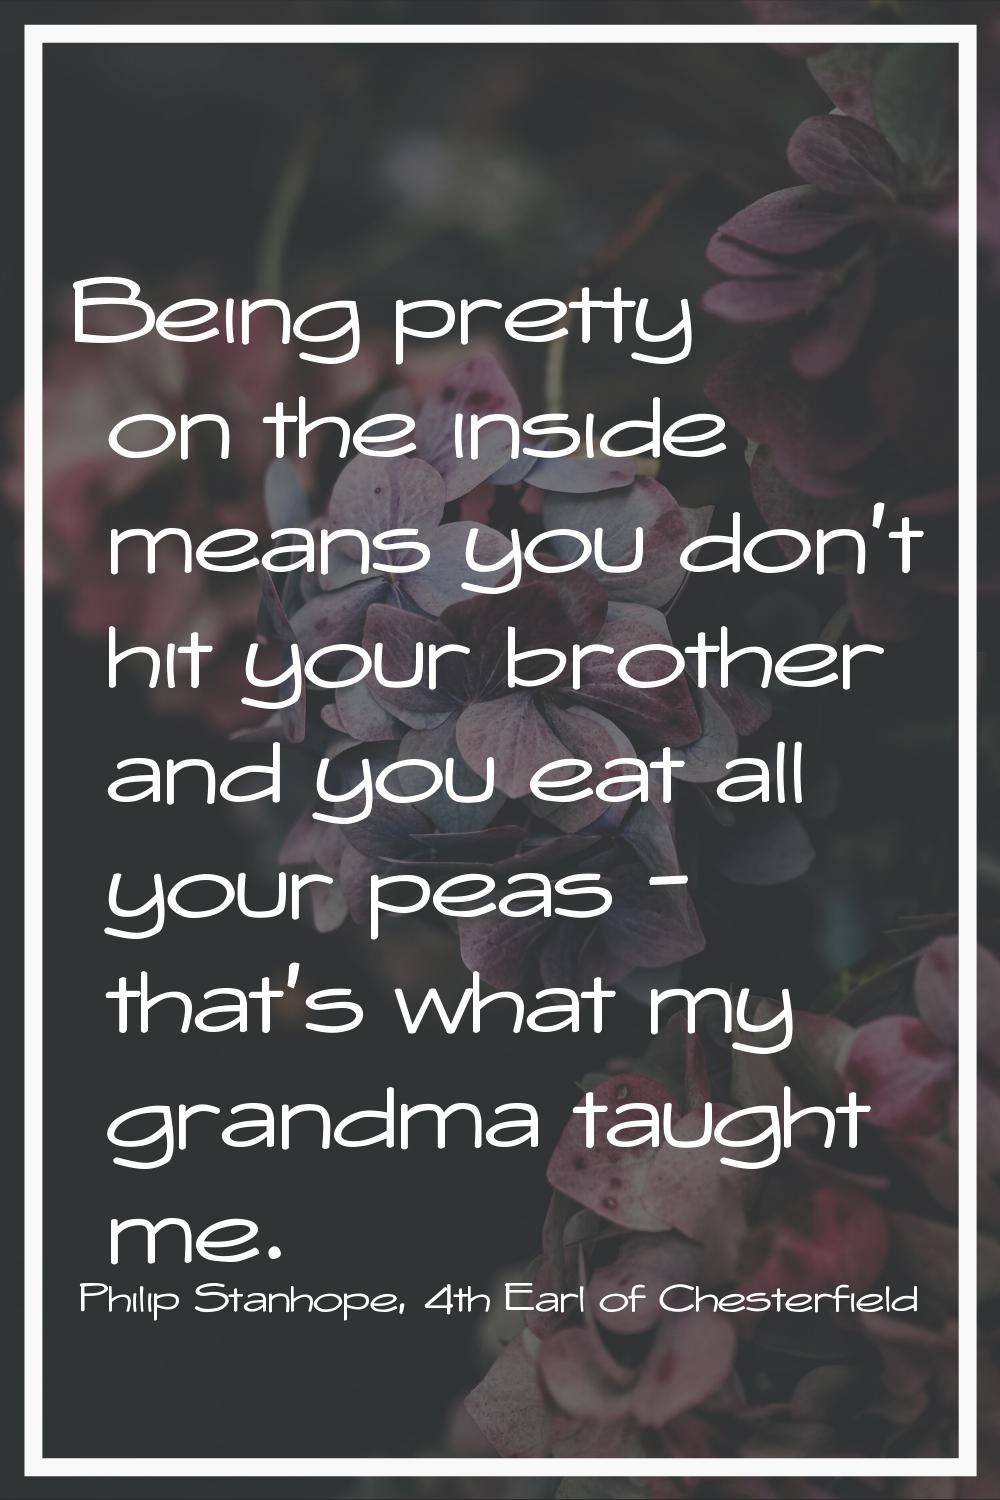 Being pretty on the inside means you don't hit your brother and you eat all your peas - that's what